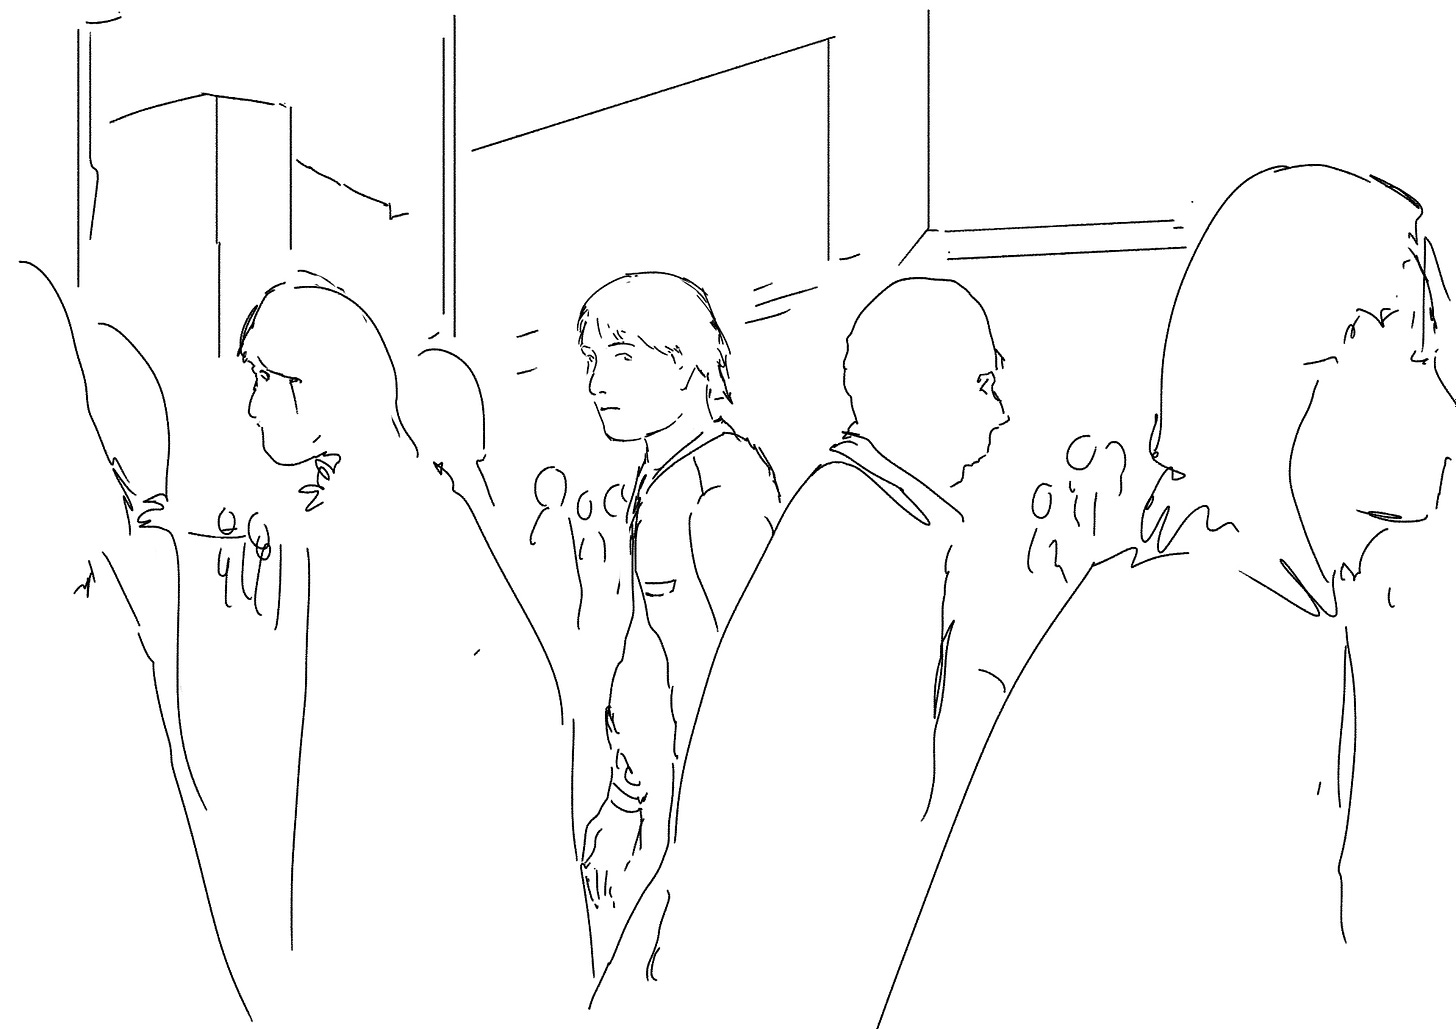 A linework sketch of a crowded outdoor scene, with a person in the centre of the image looking forlorn.